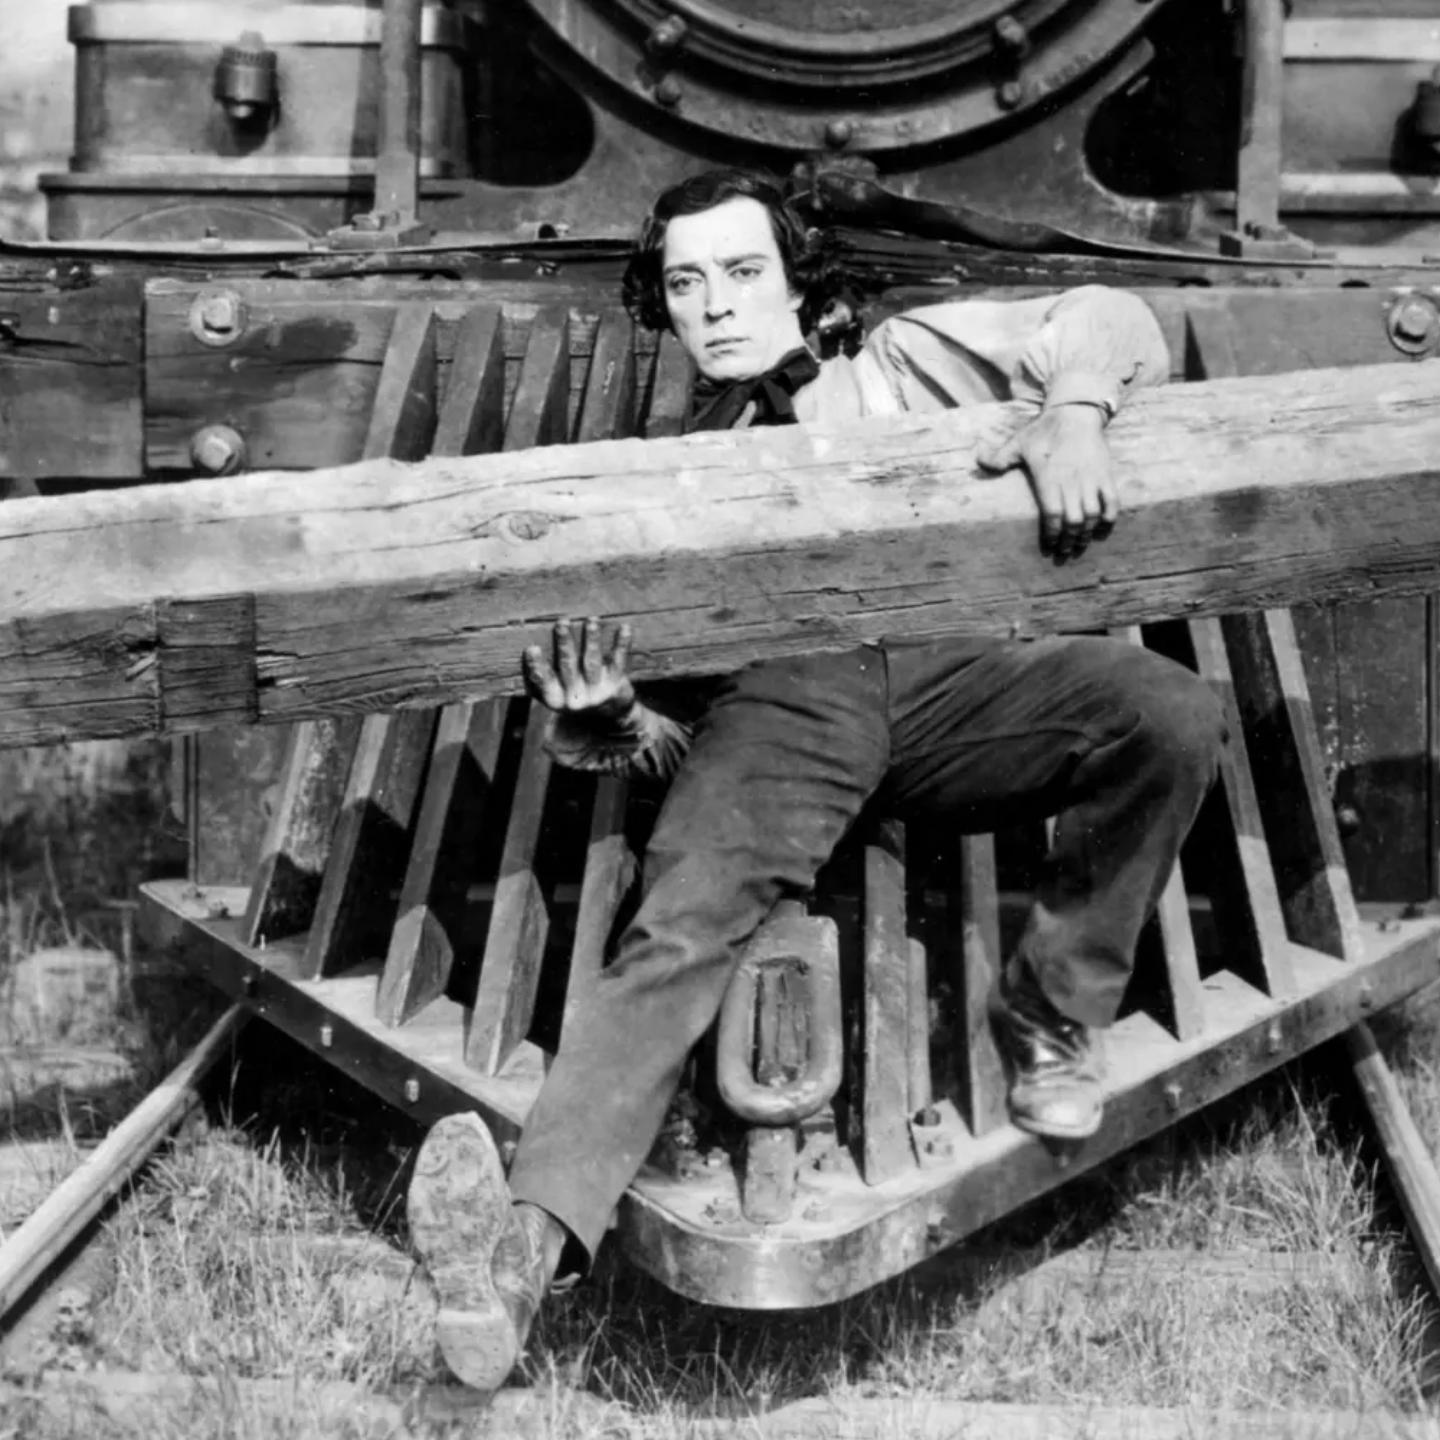 Buster Keaton sitting in a wooden wagon